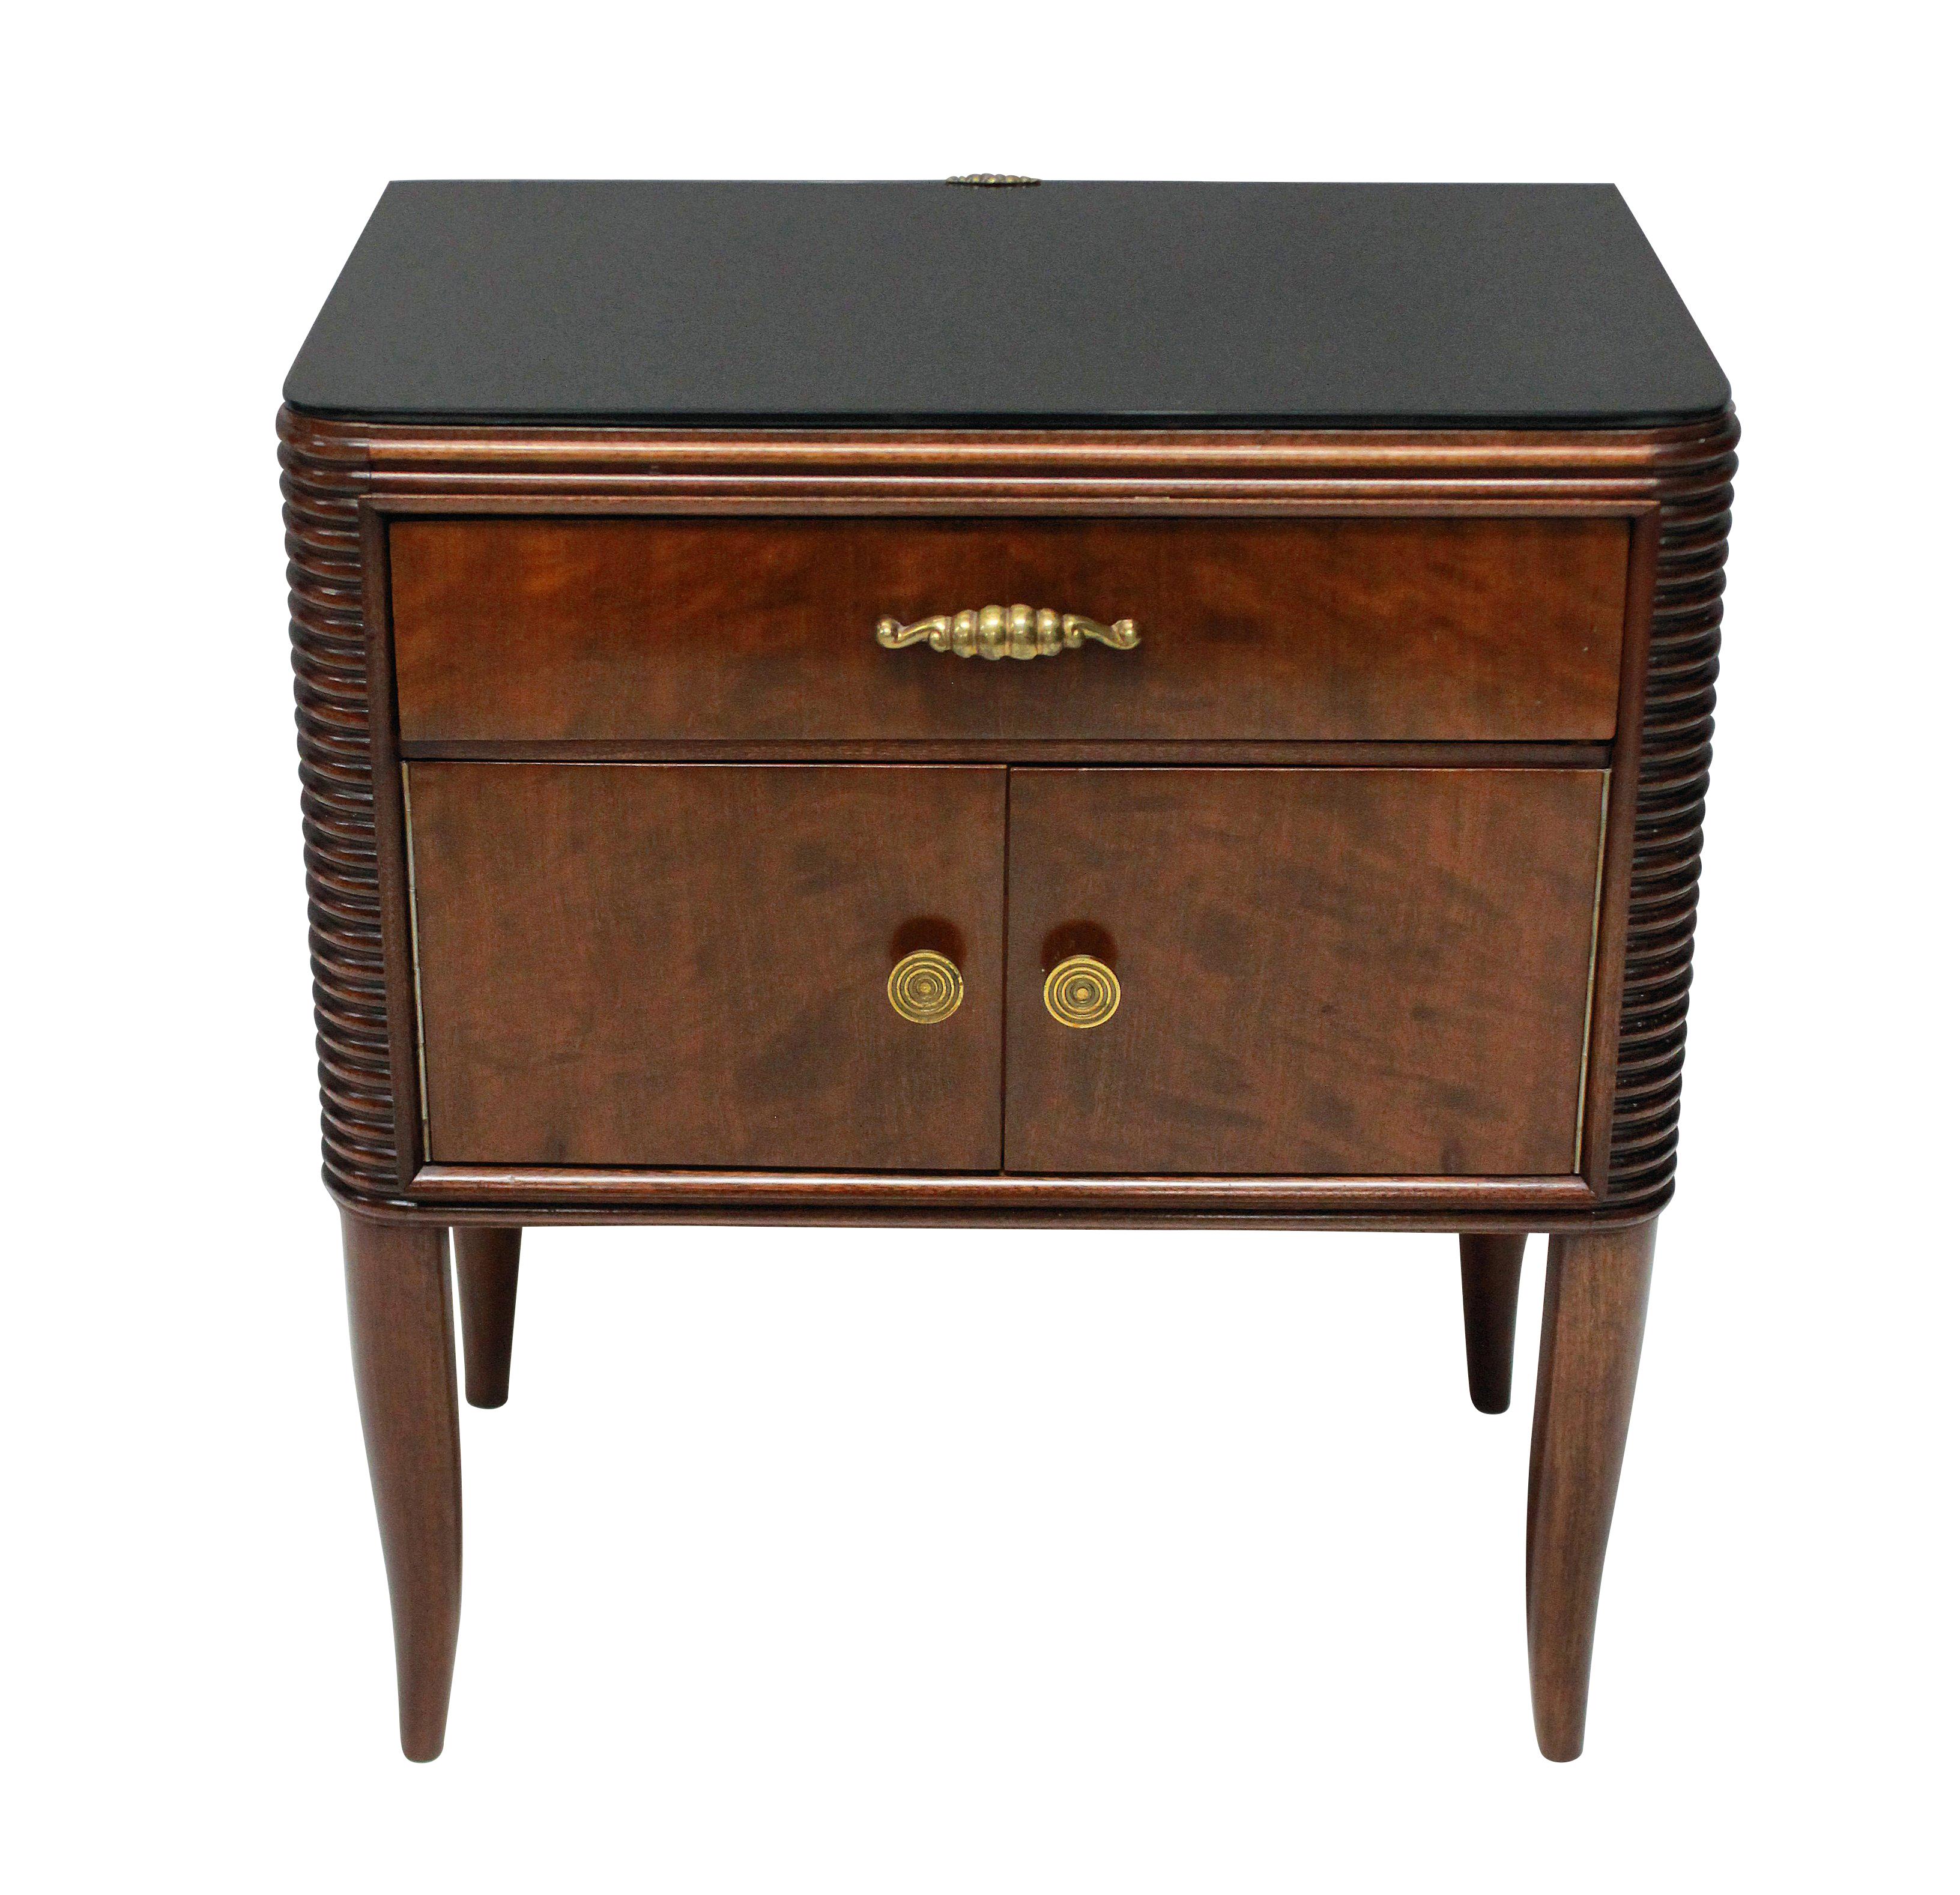 A pair of Italian nightstands by Paolo Buffa in flame mahogany, comprising a cupboard and drawer above. On fine tapering legs, with black glass tops and nice detailing in the brass work.